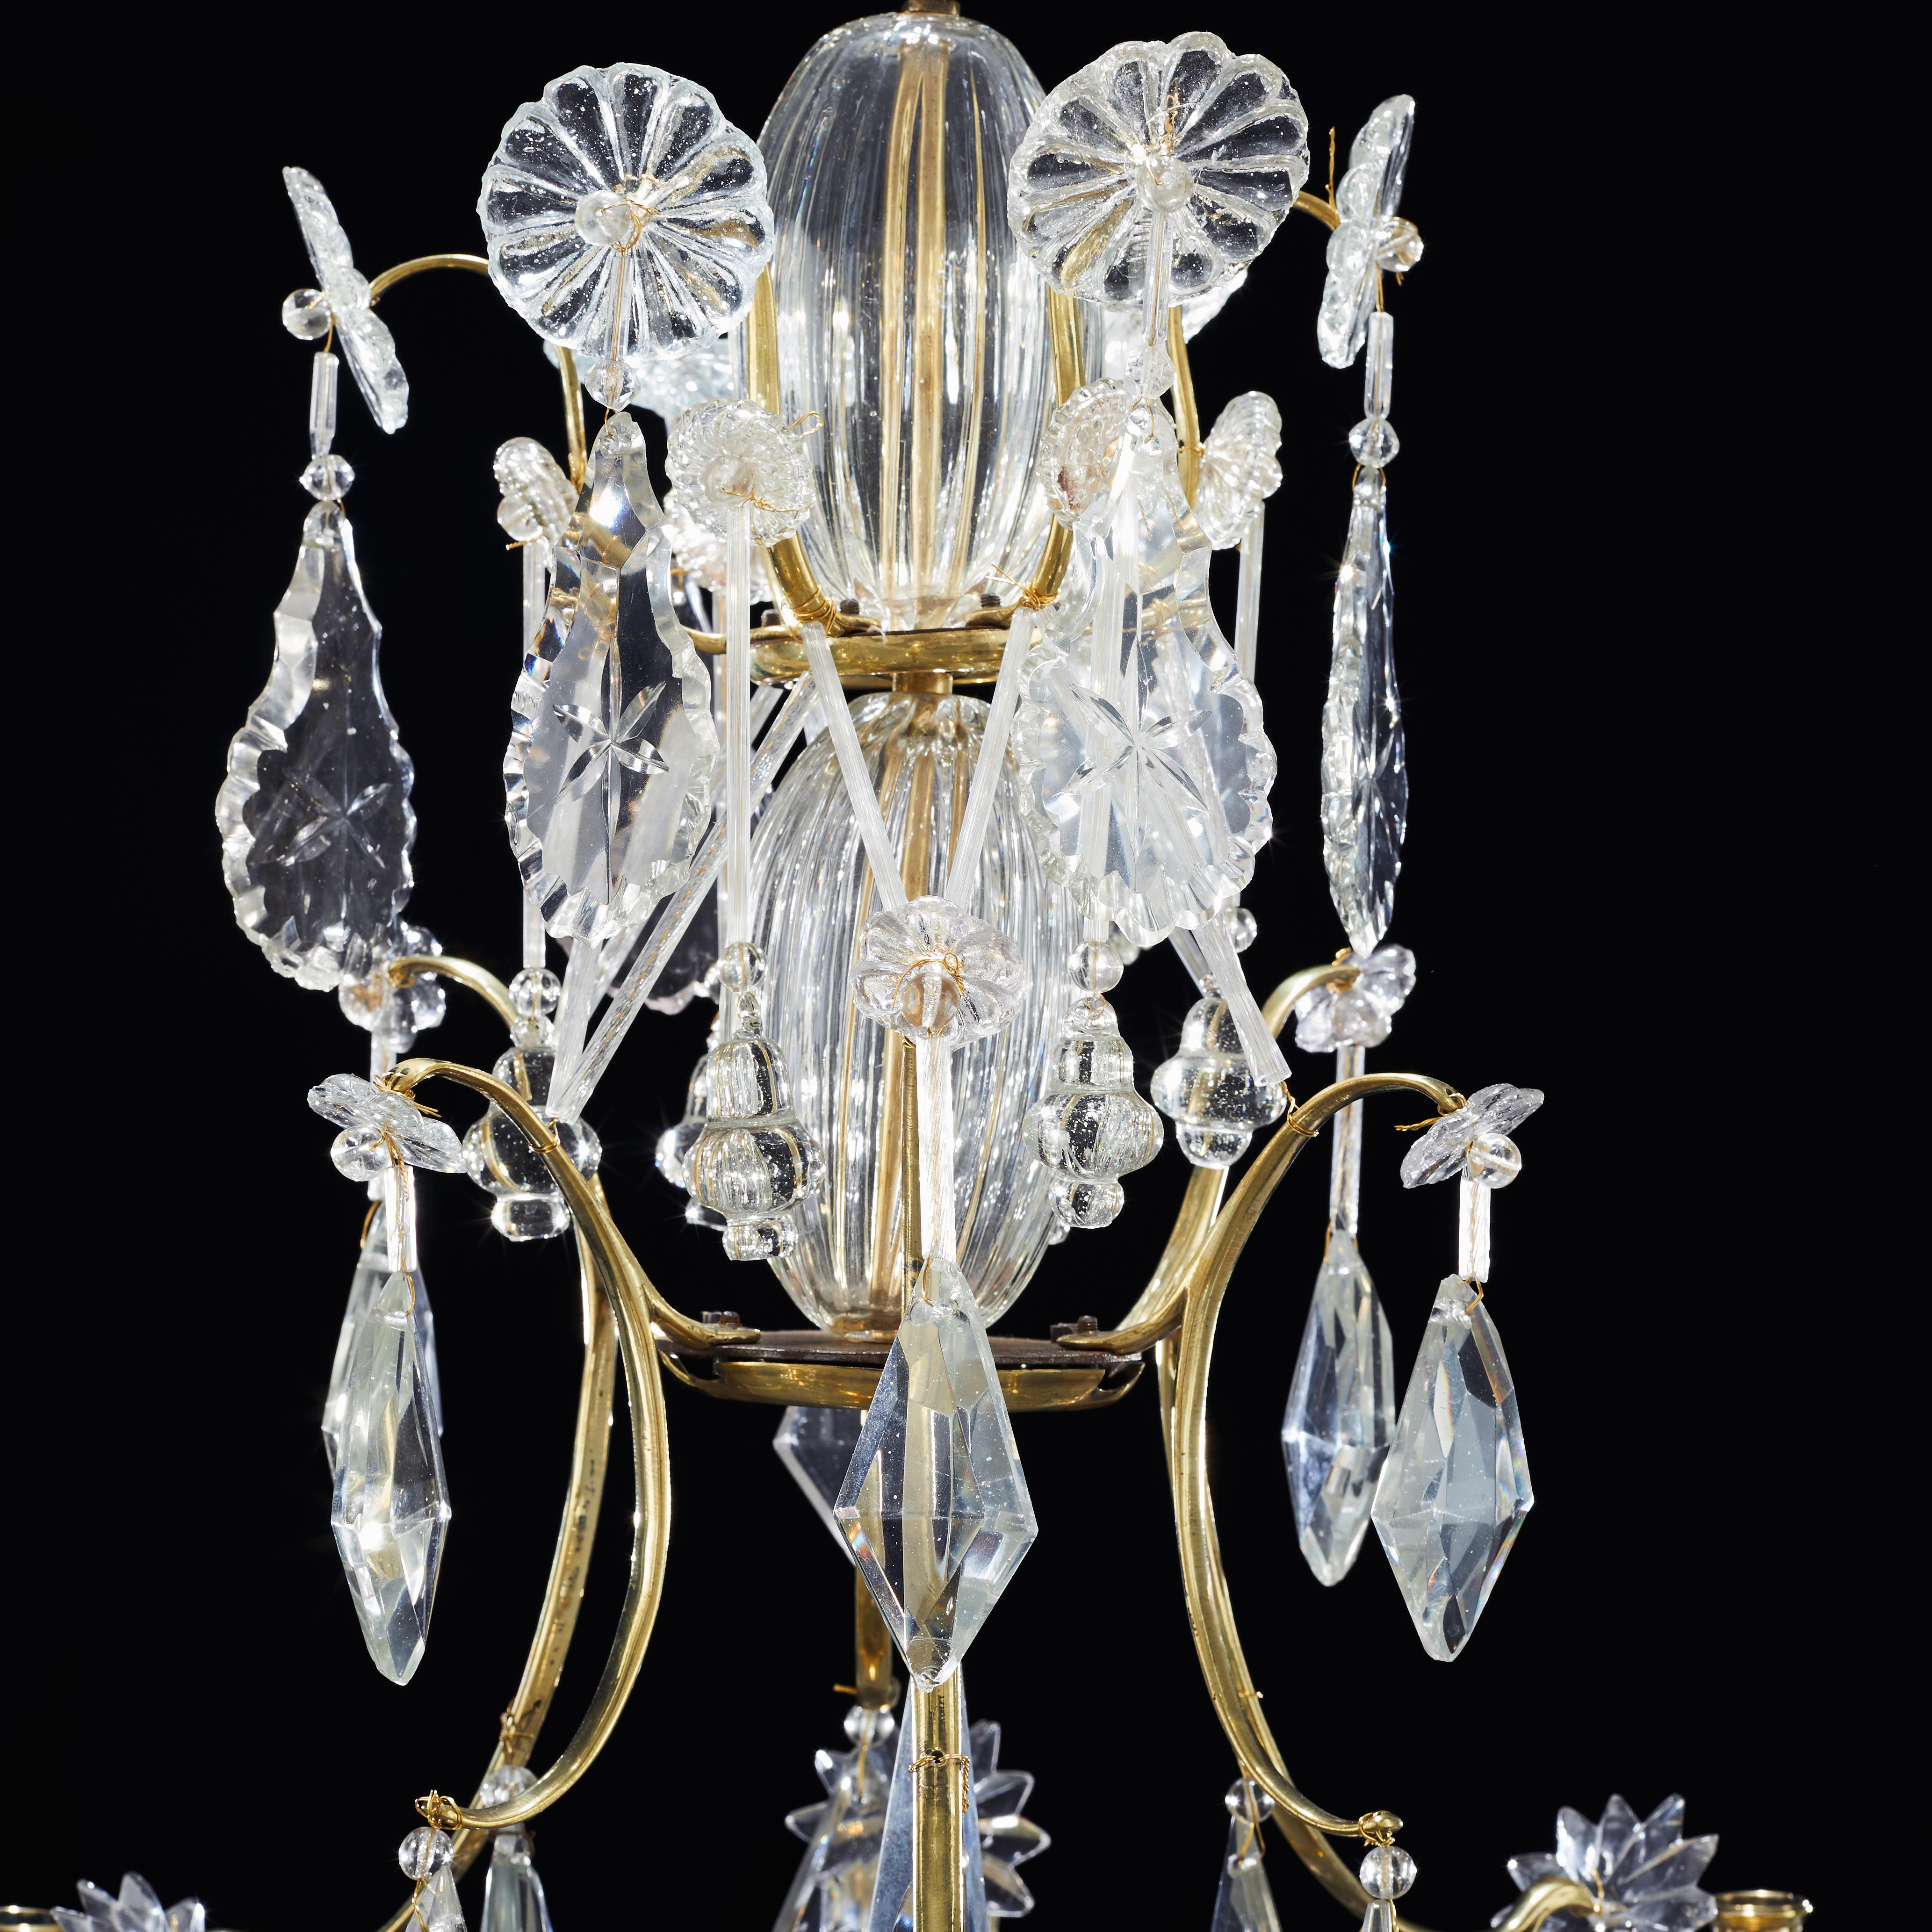 A Swedish 18th century 6-light Rococo crystal and gilt brass chandelier made in Stockholm, circa 1760-1780. It is unusual that Swedish Rococo chandeliers have a gilt cage.